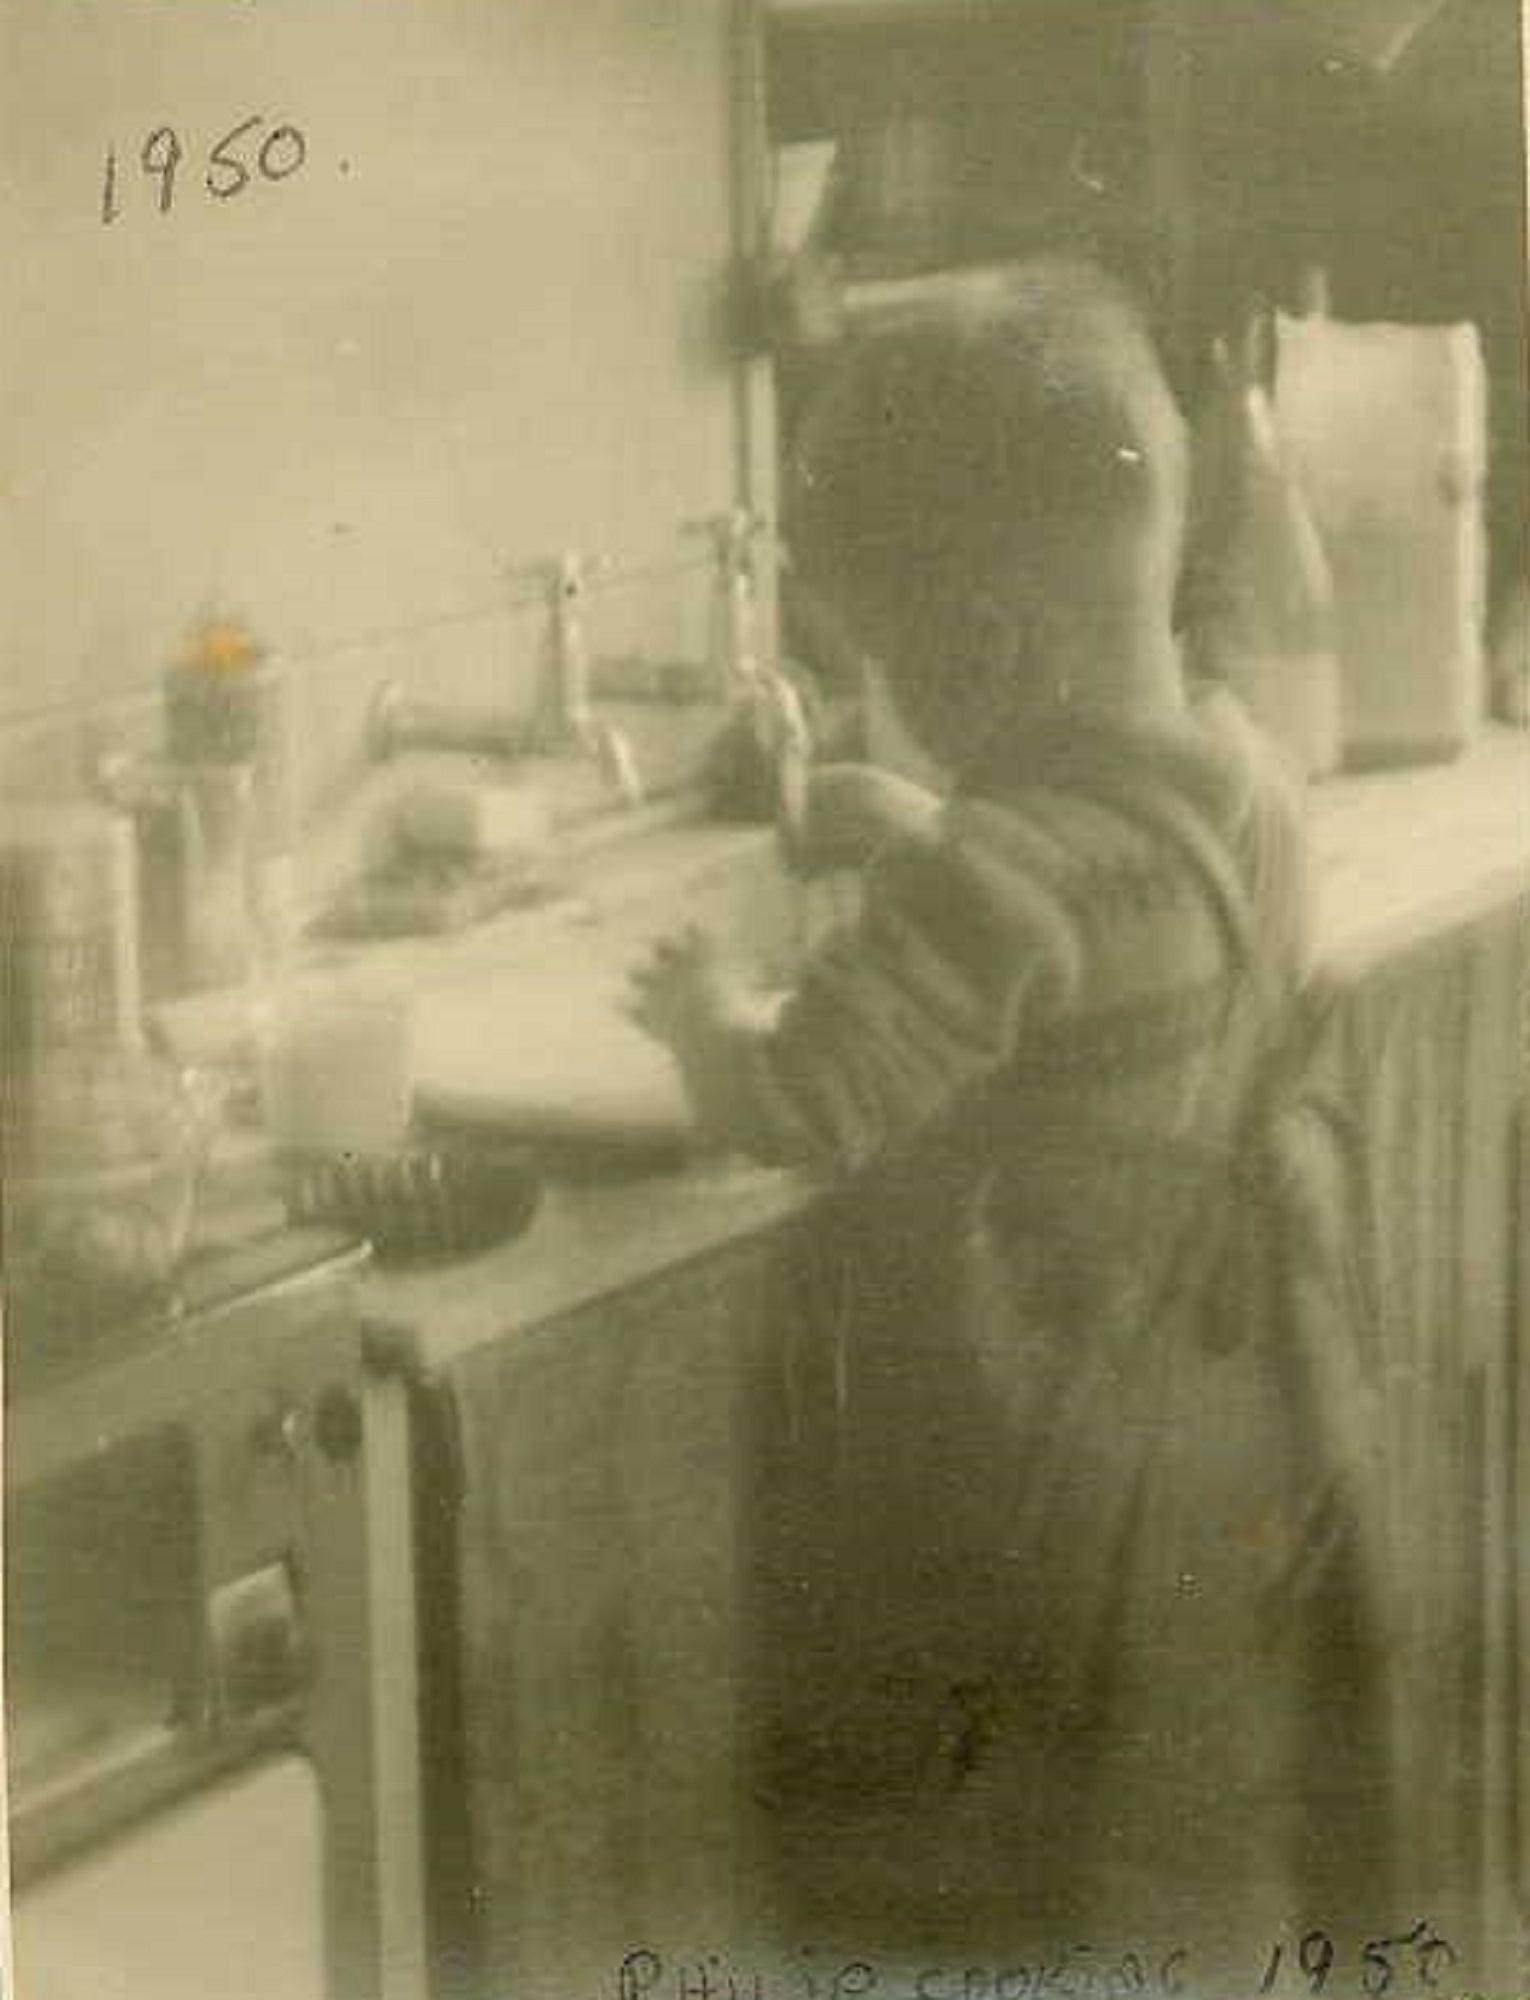 Phil Goude in the prefab kitchen 1950. Bants Crescent, Northampton